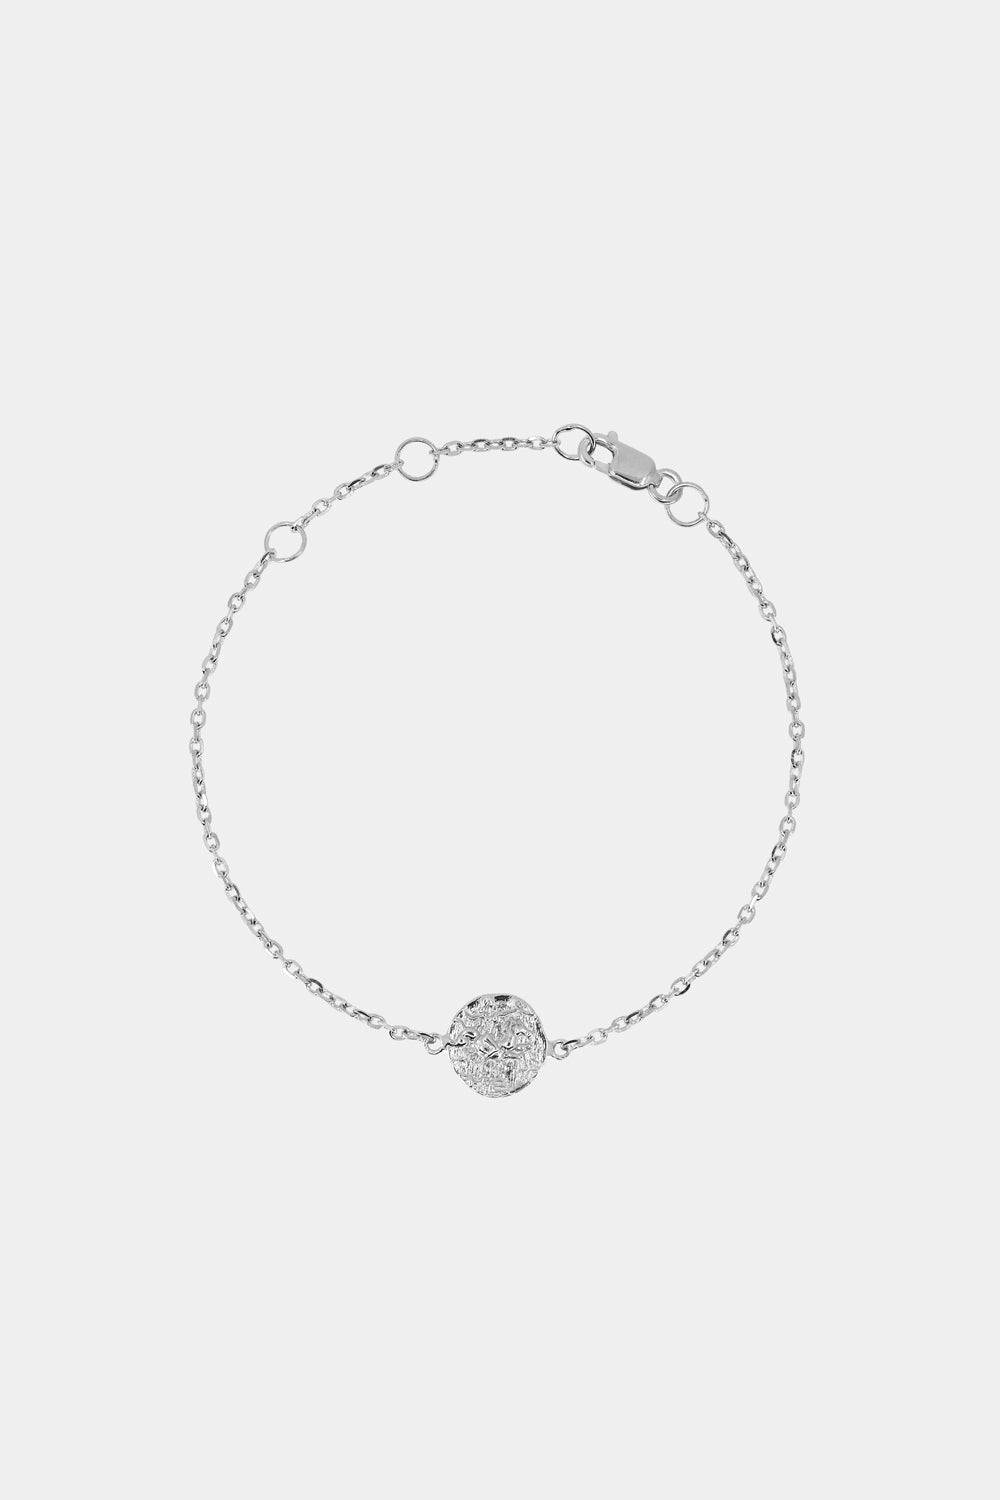 Coin Bracelet | Silver or 9K White Gold, More Options Available